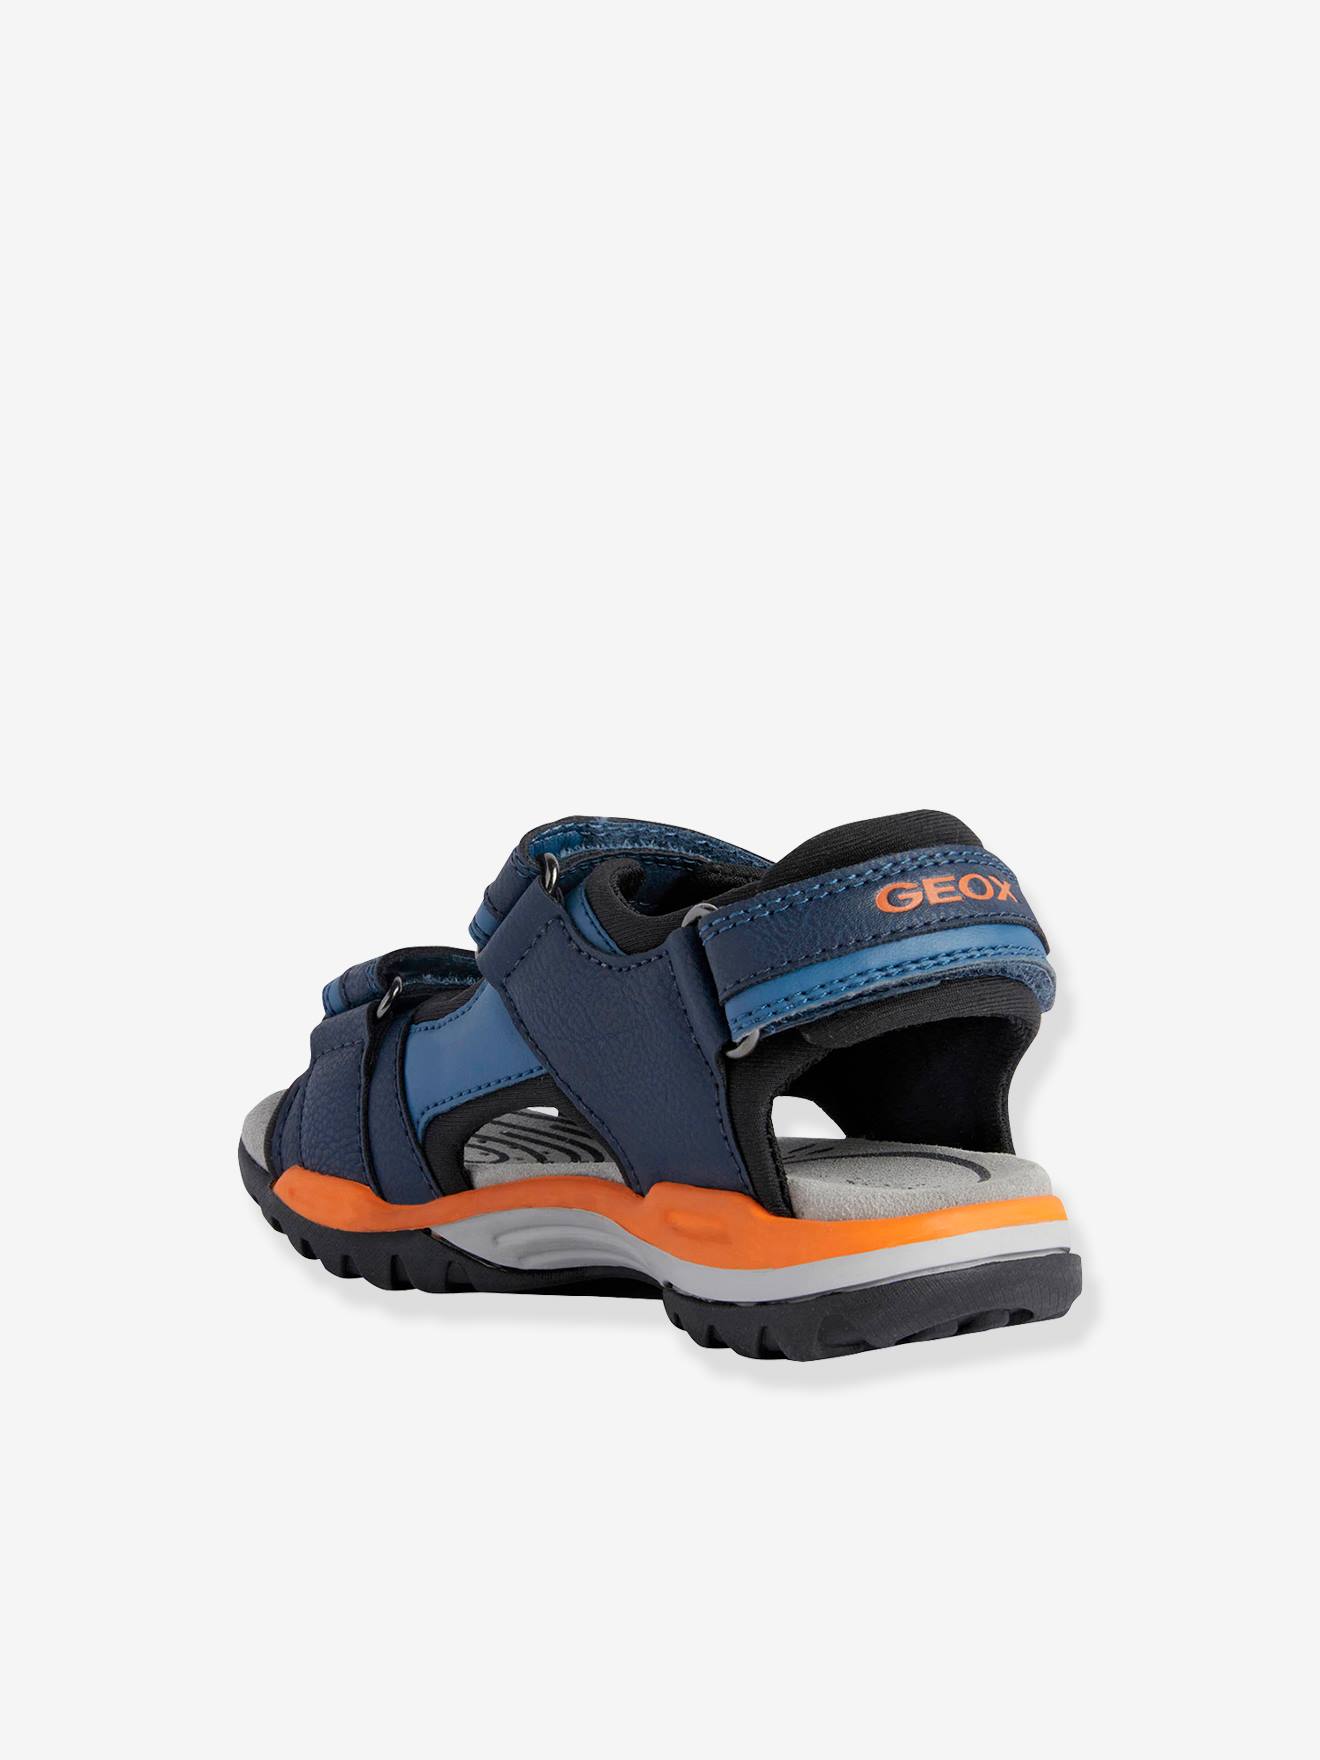 Sandals for Boys, blue J. solid, Shoes - GEOX® by Borealis medium B.A